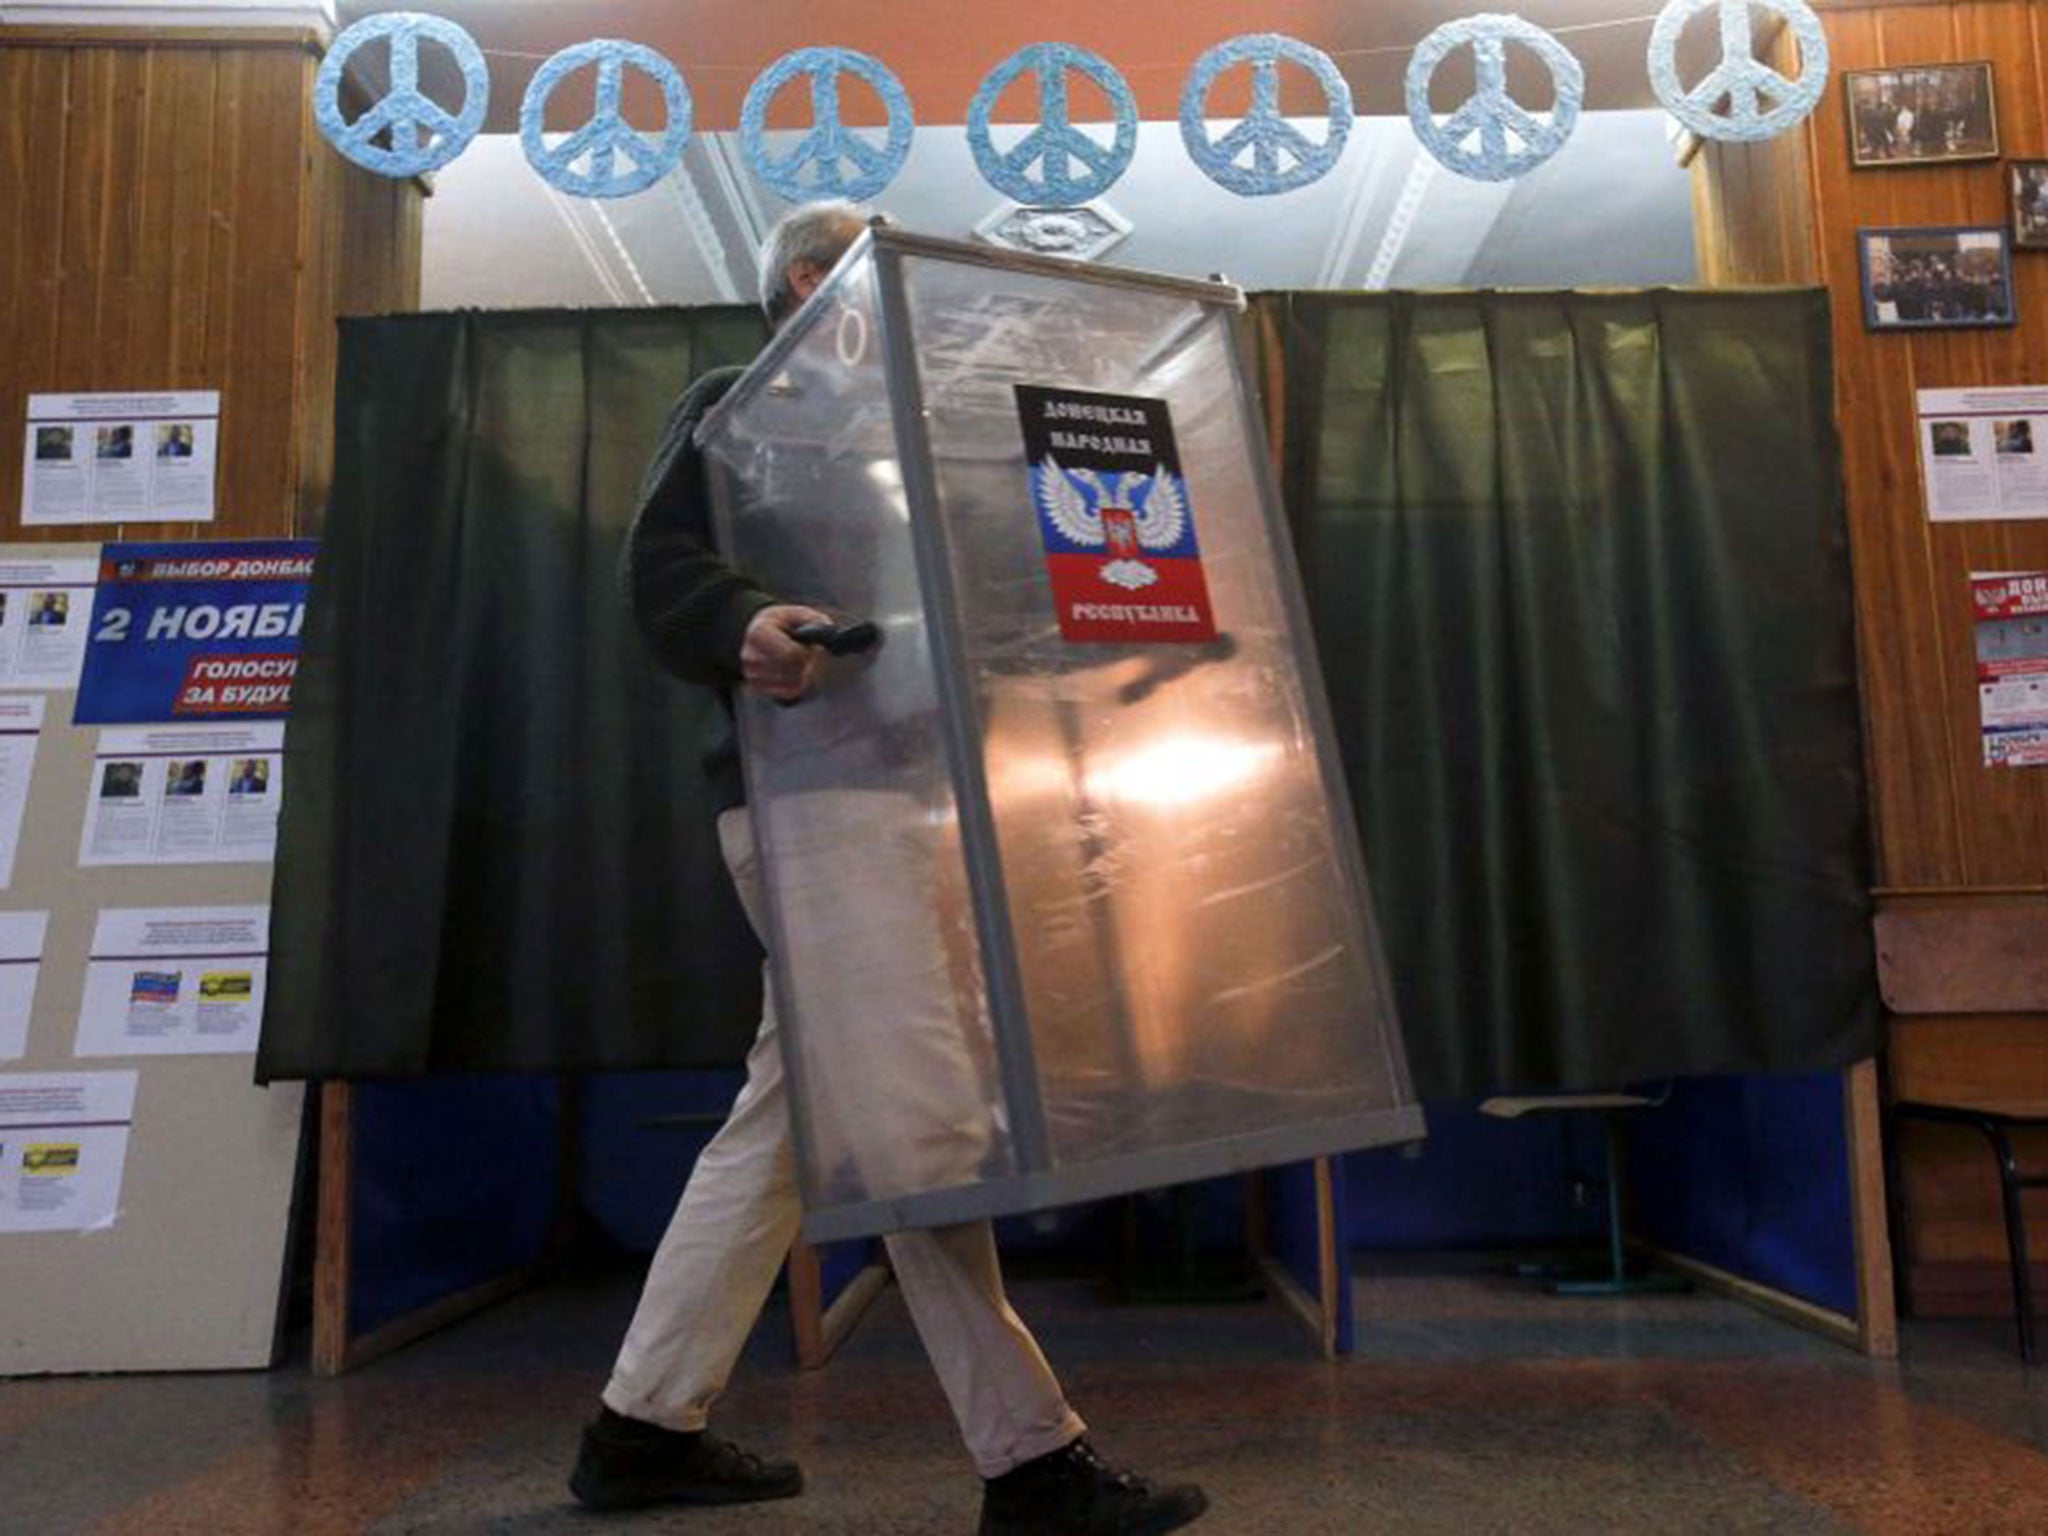 Preparing for today’s election at a polling station in Donetsk